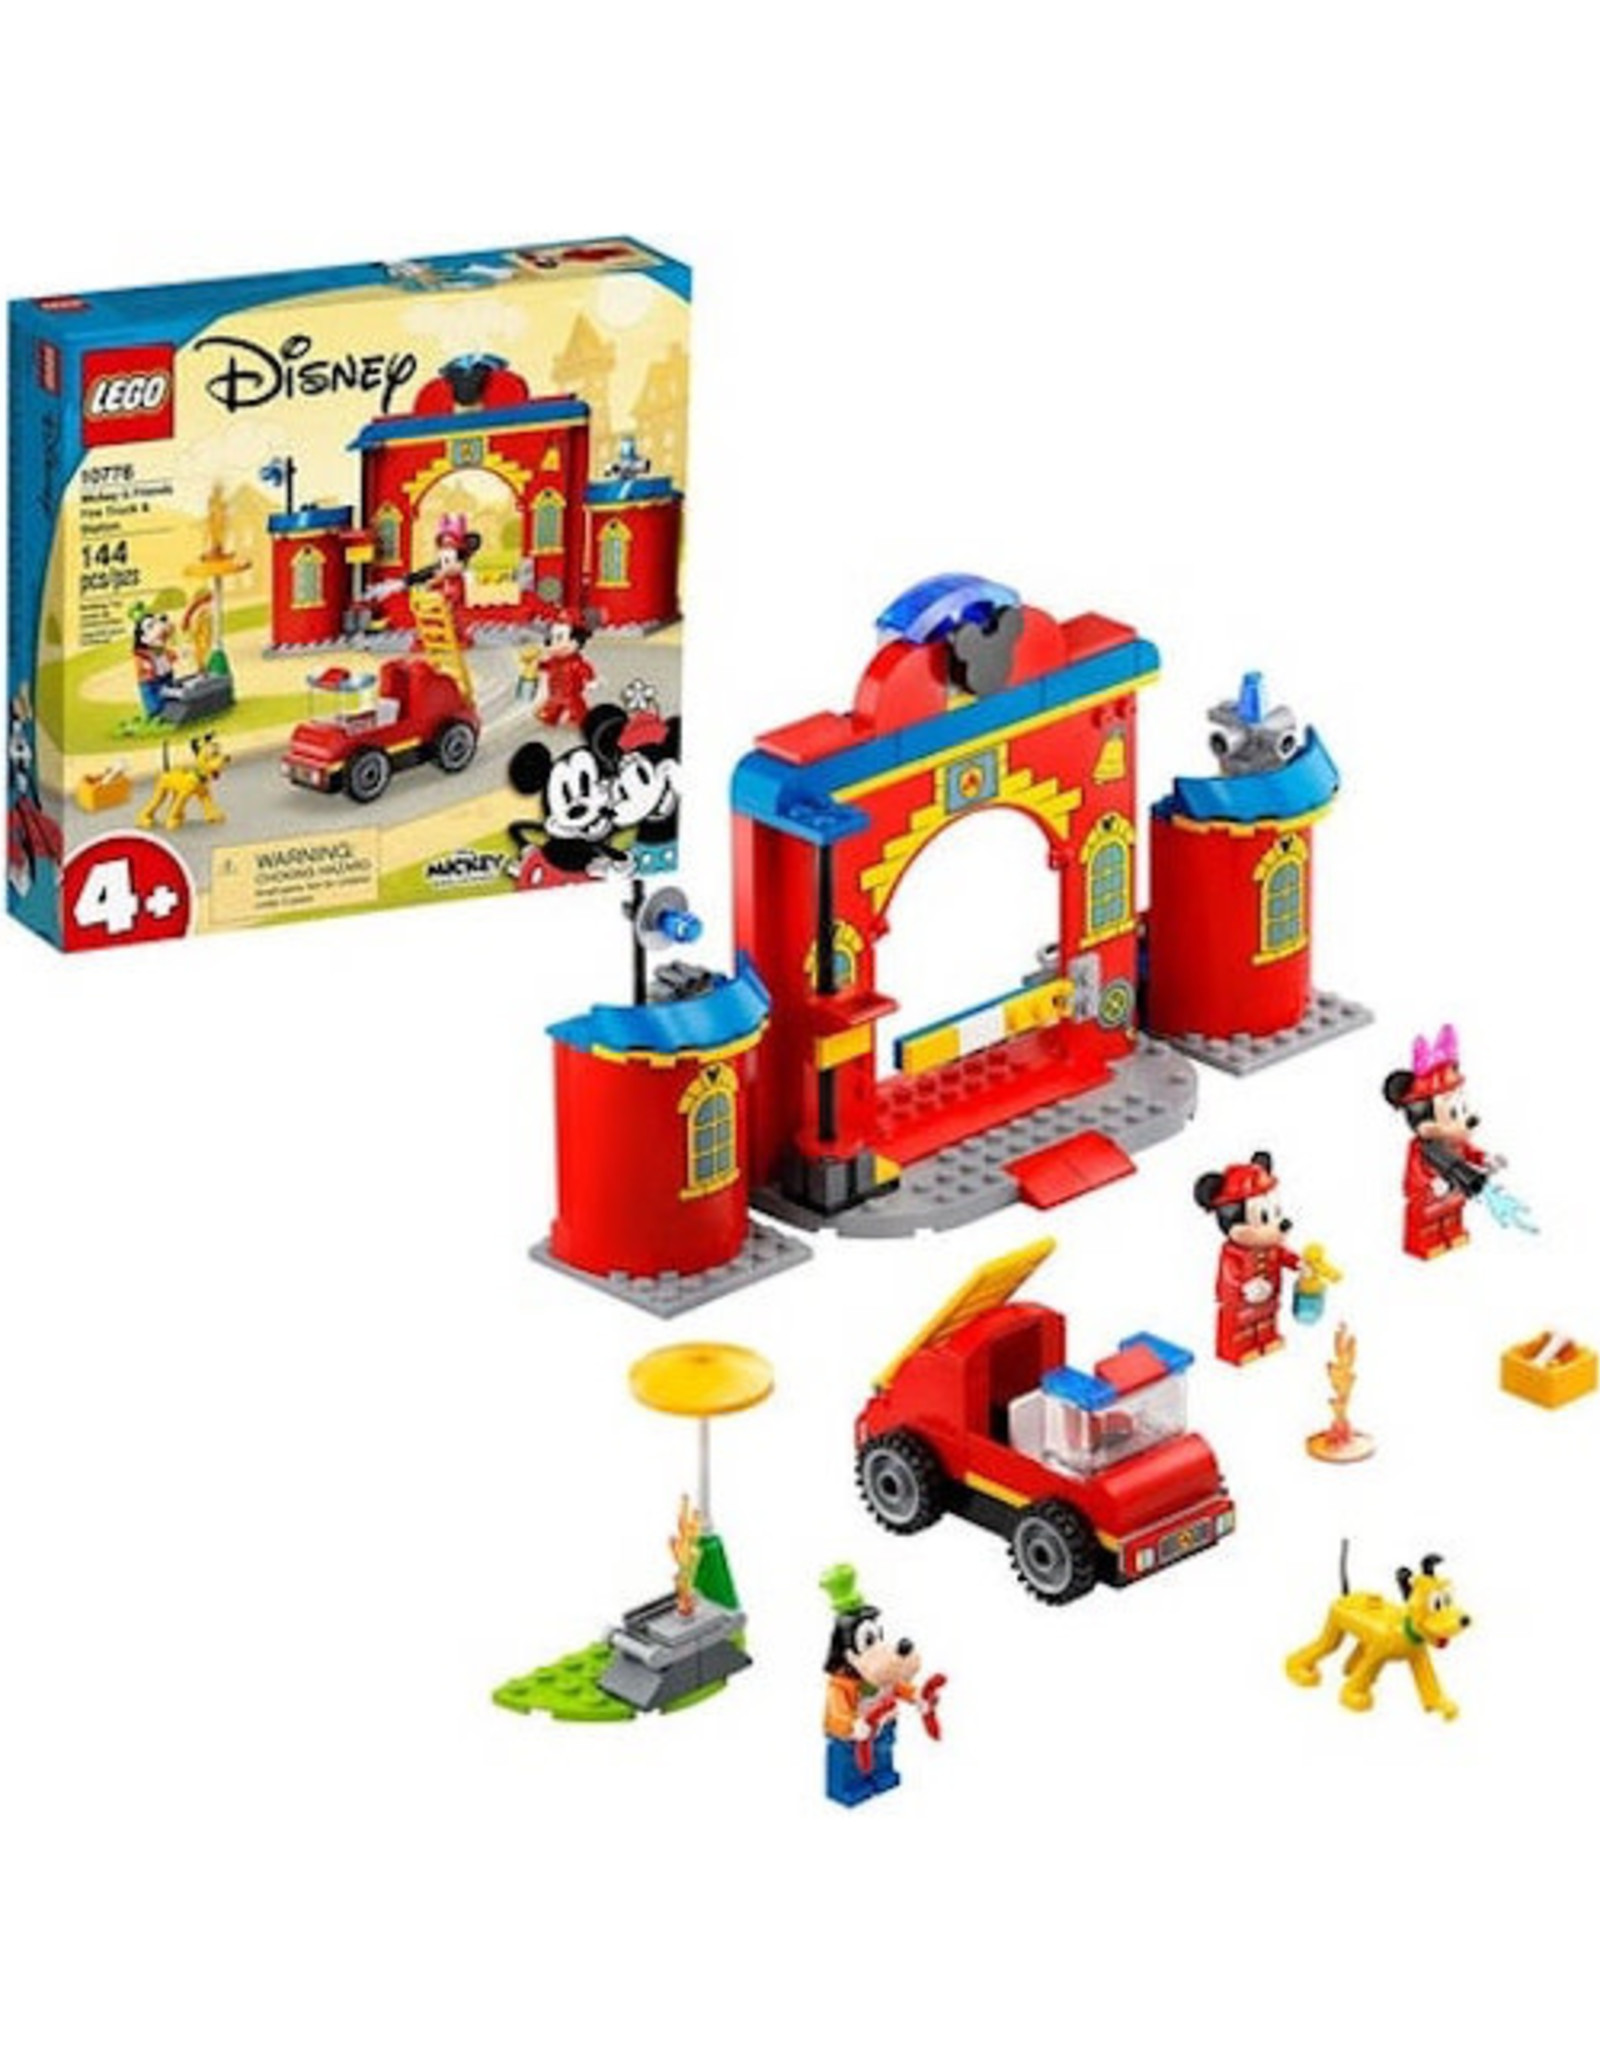 Lego Mickey and Friends Fire Truck and Station